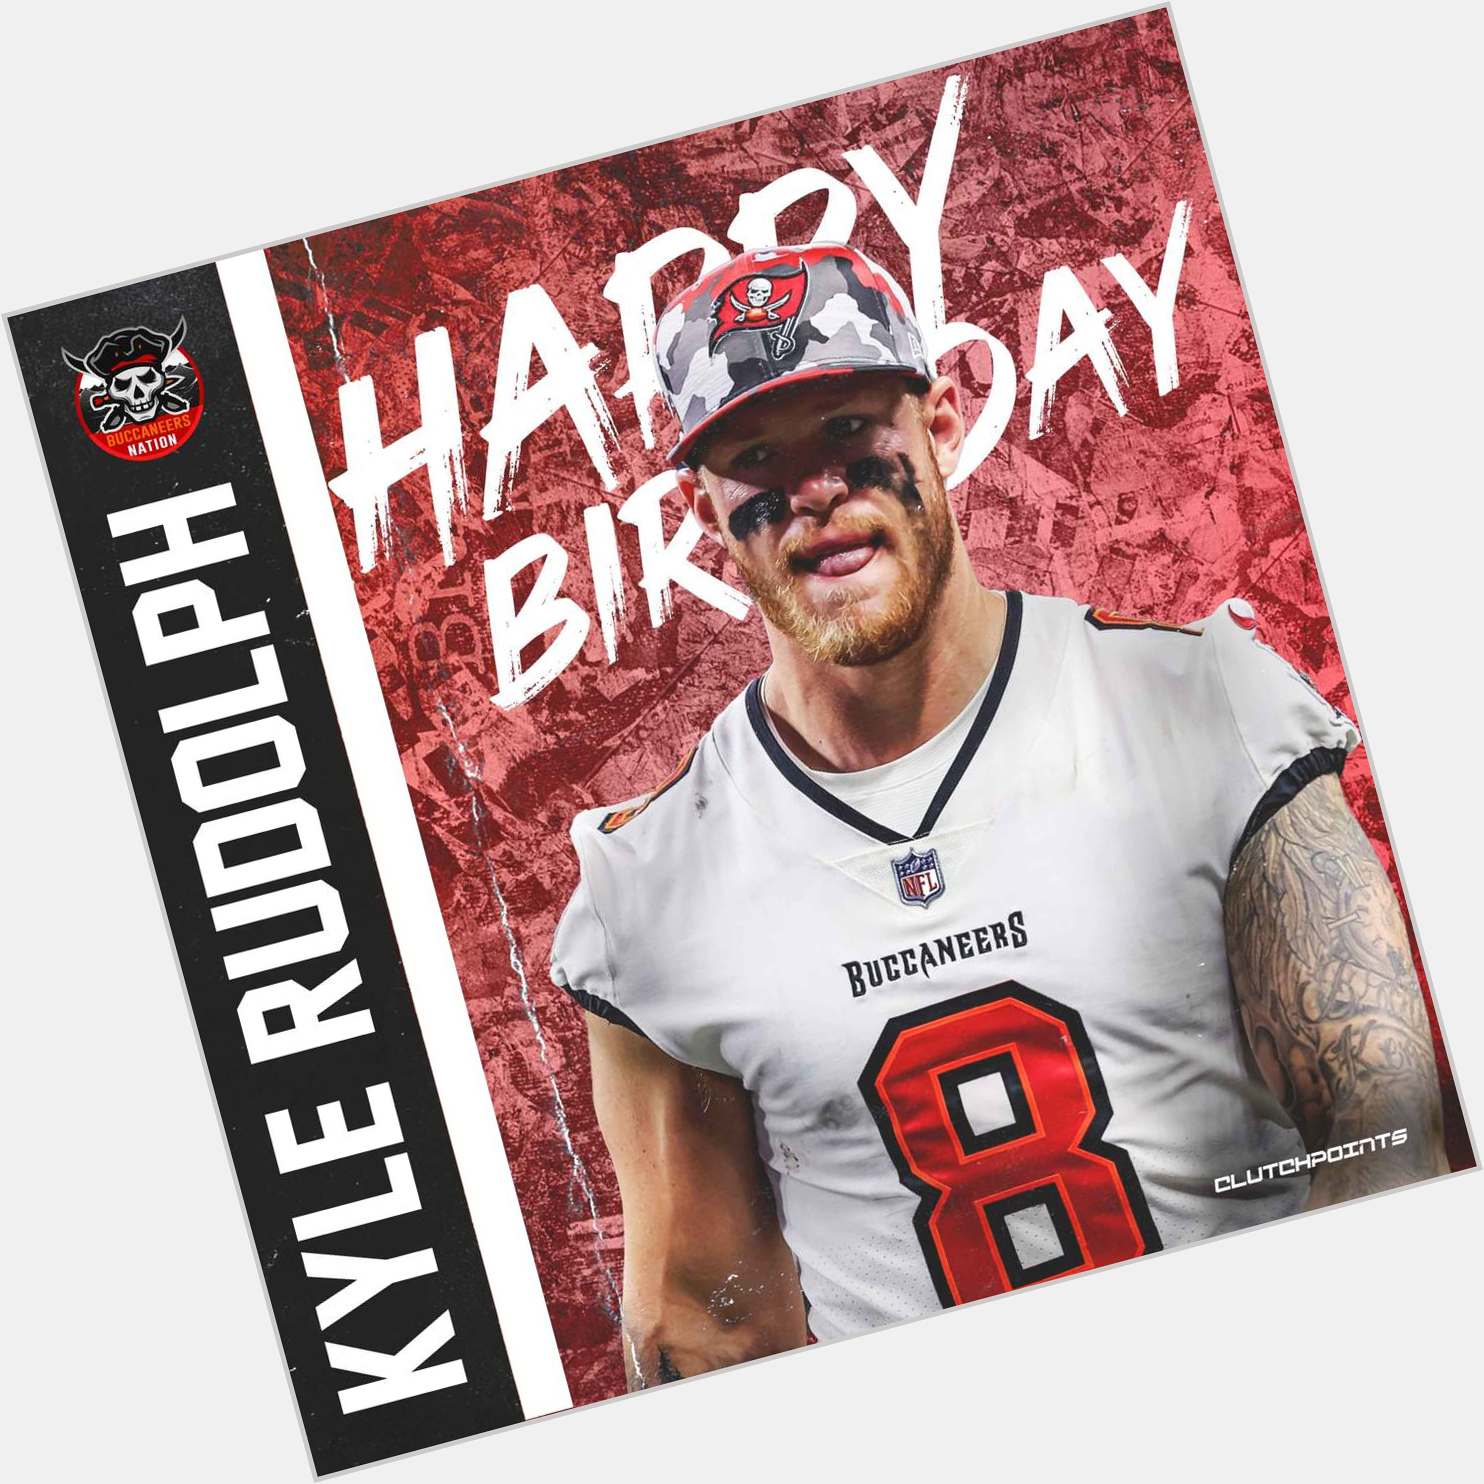 Bucs Nation, join us in wishing Kyle Rudolph a happy 33rd birthday 